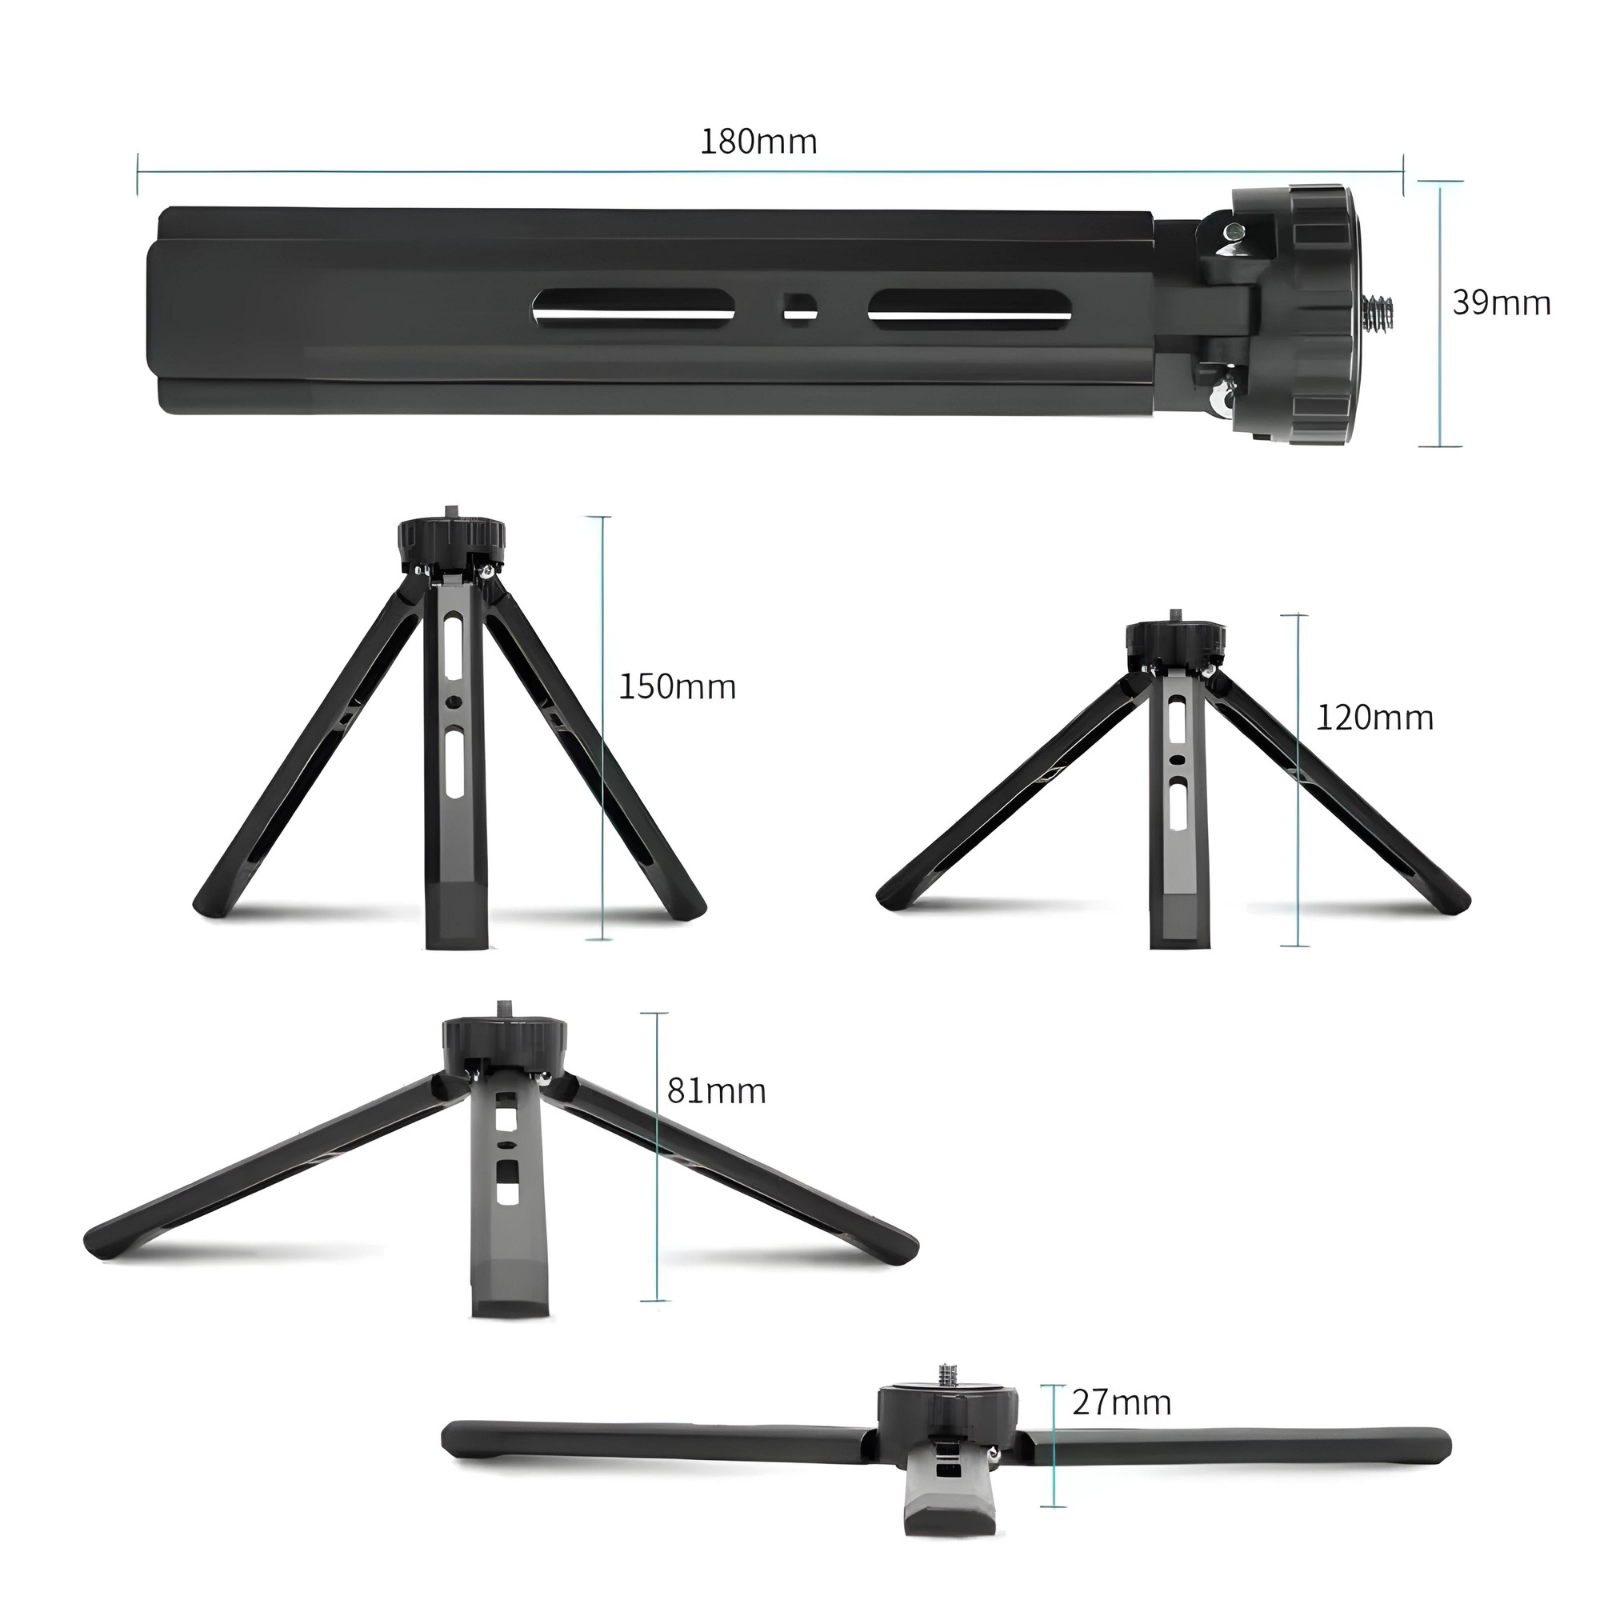 Compact Versatile Tripod: Light & Sturdy for All Photographers